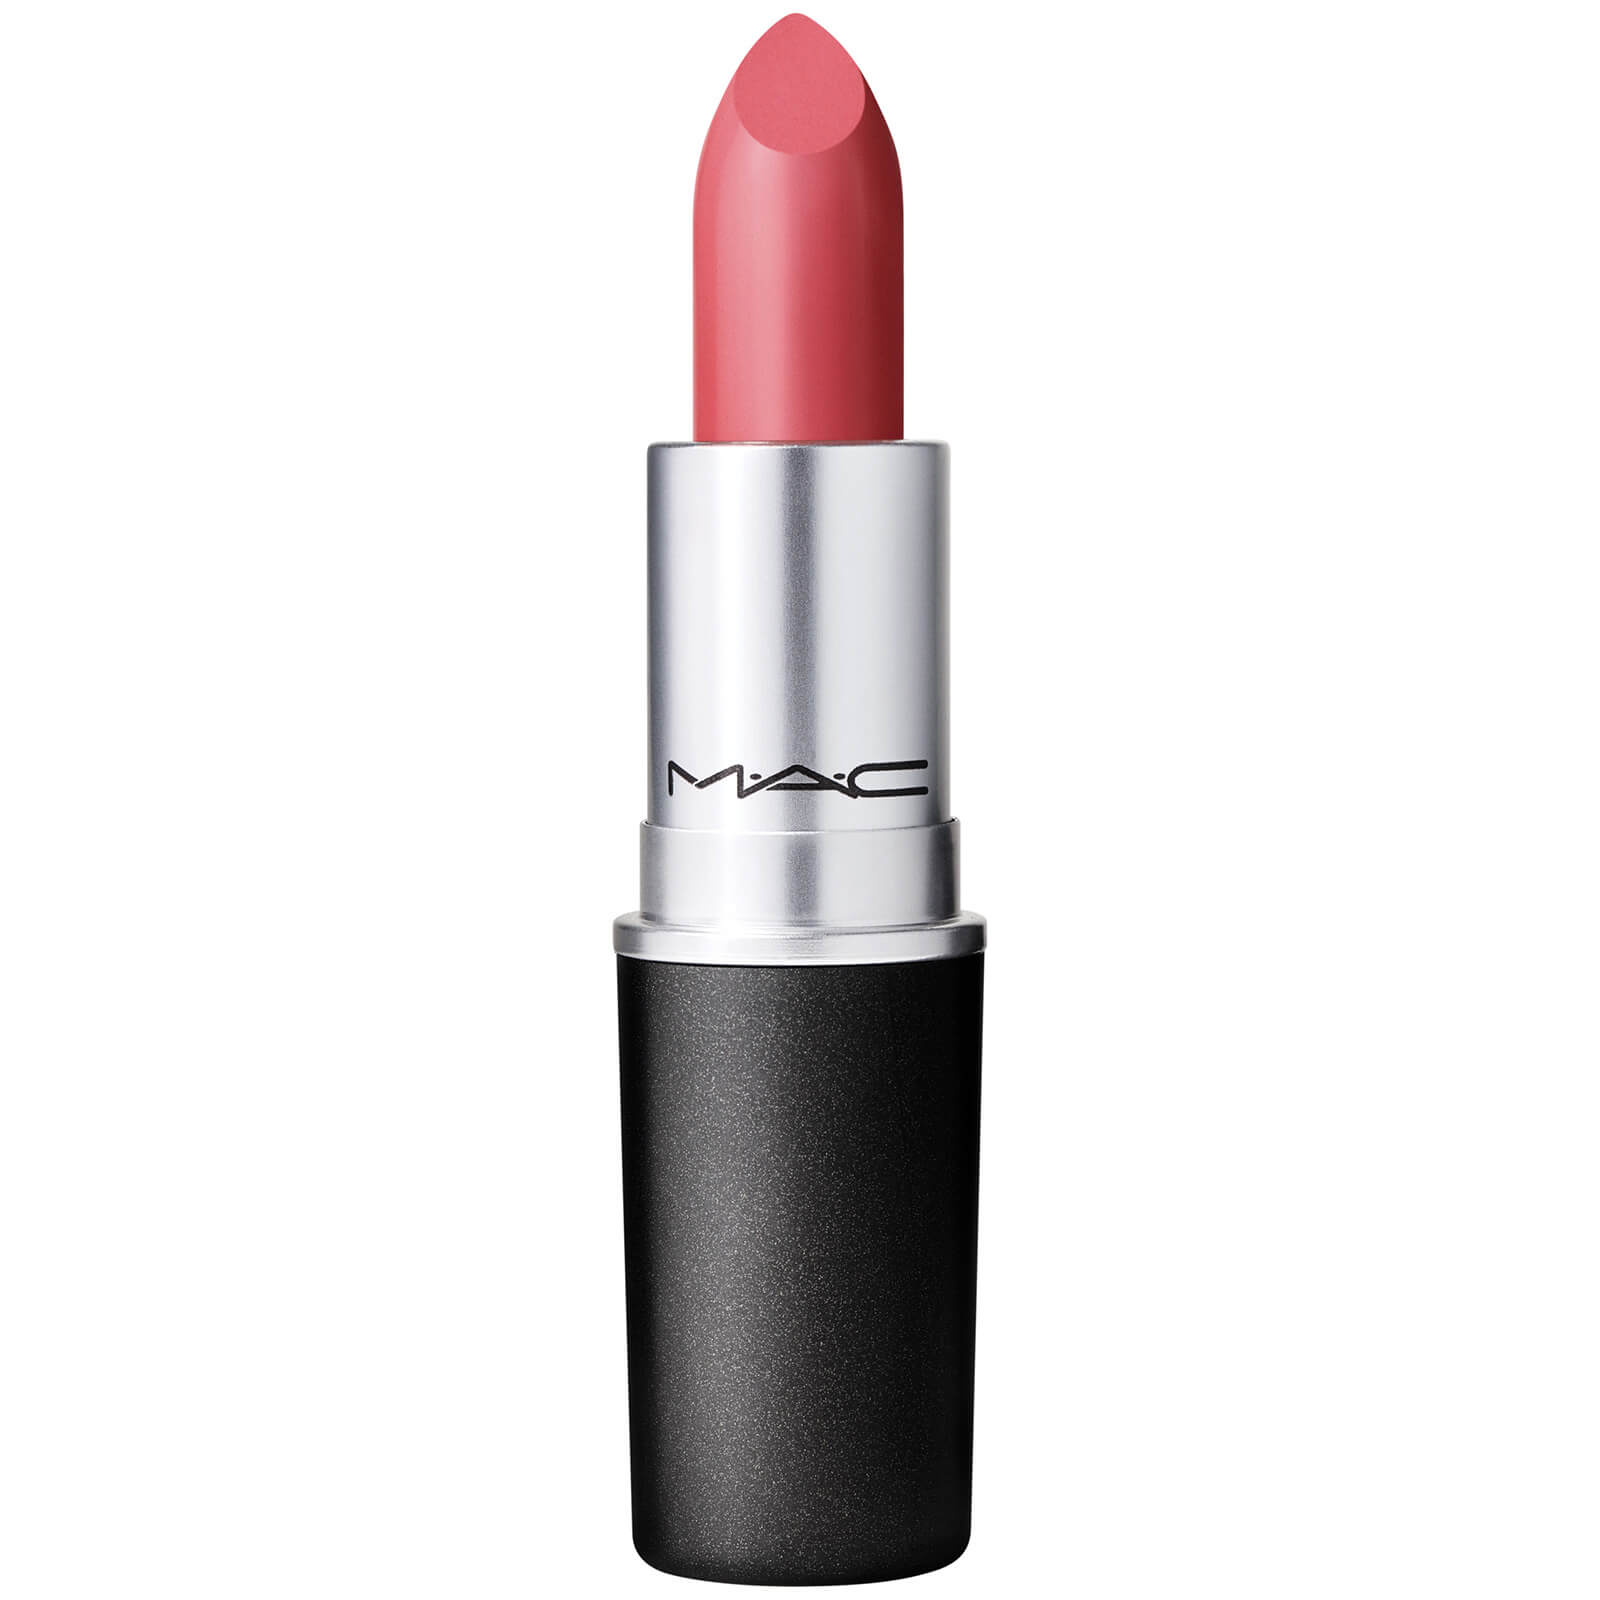 MAC Amplified Crème Lipstick Re-Think Pink (Various Shades) - Just Curious